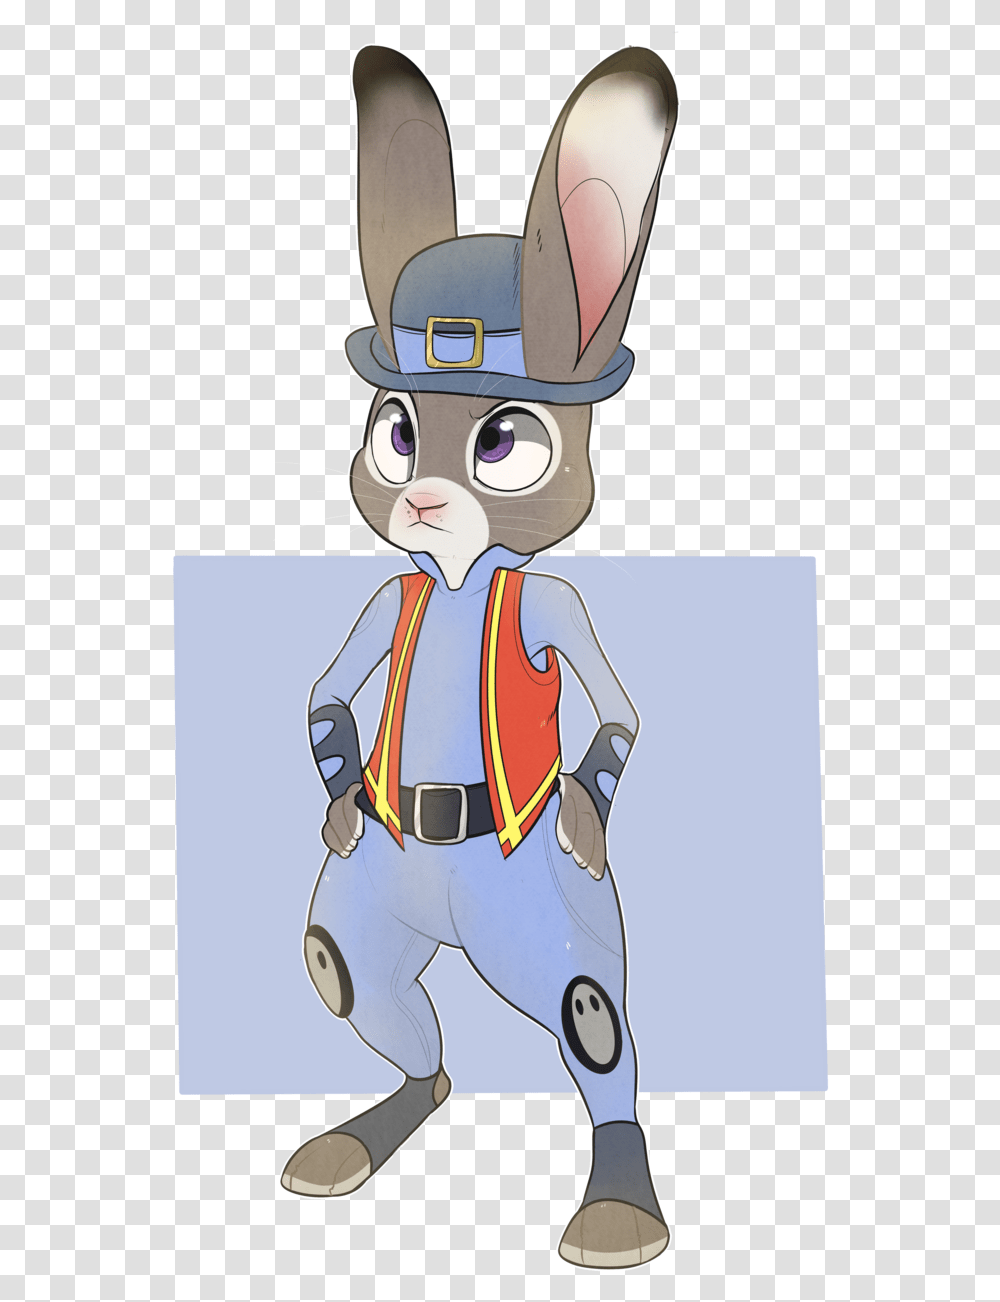 Disney's Zootopia Images Judy Hopps Hd Wallpaper And Judy Hopps, Costume, Label, Mascot Transparent Png